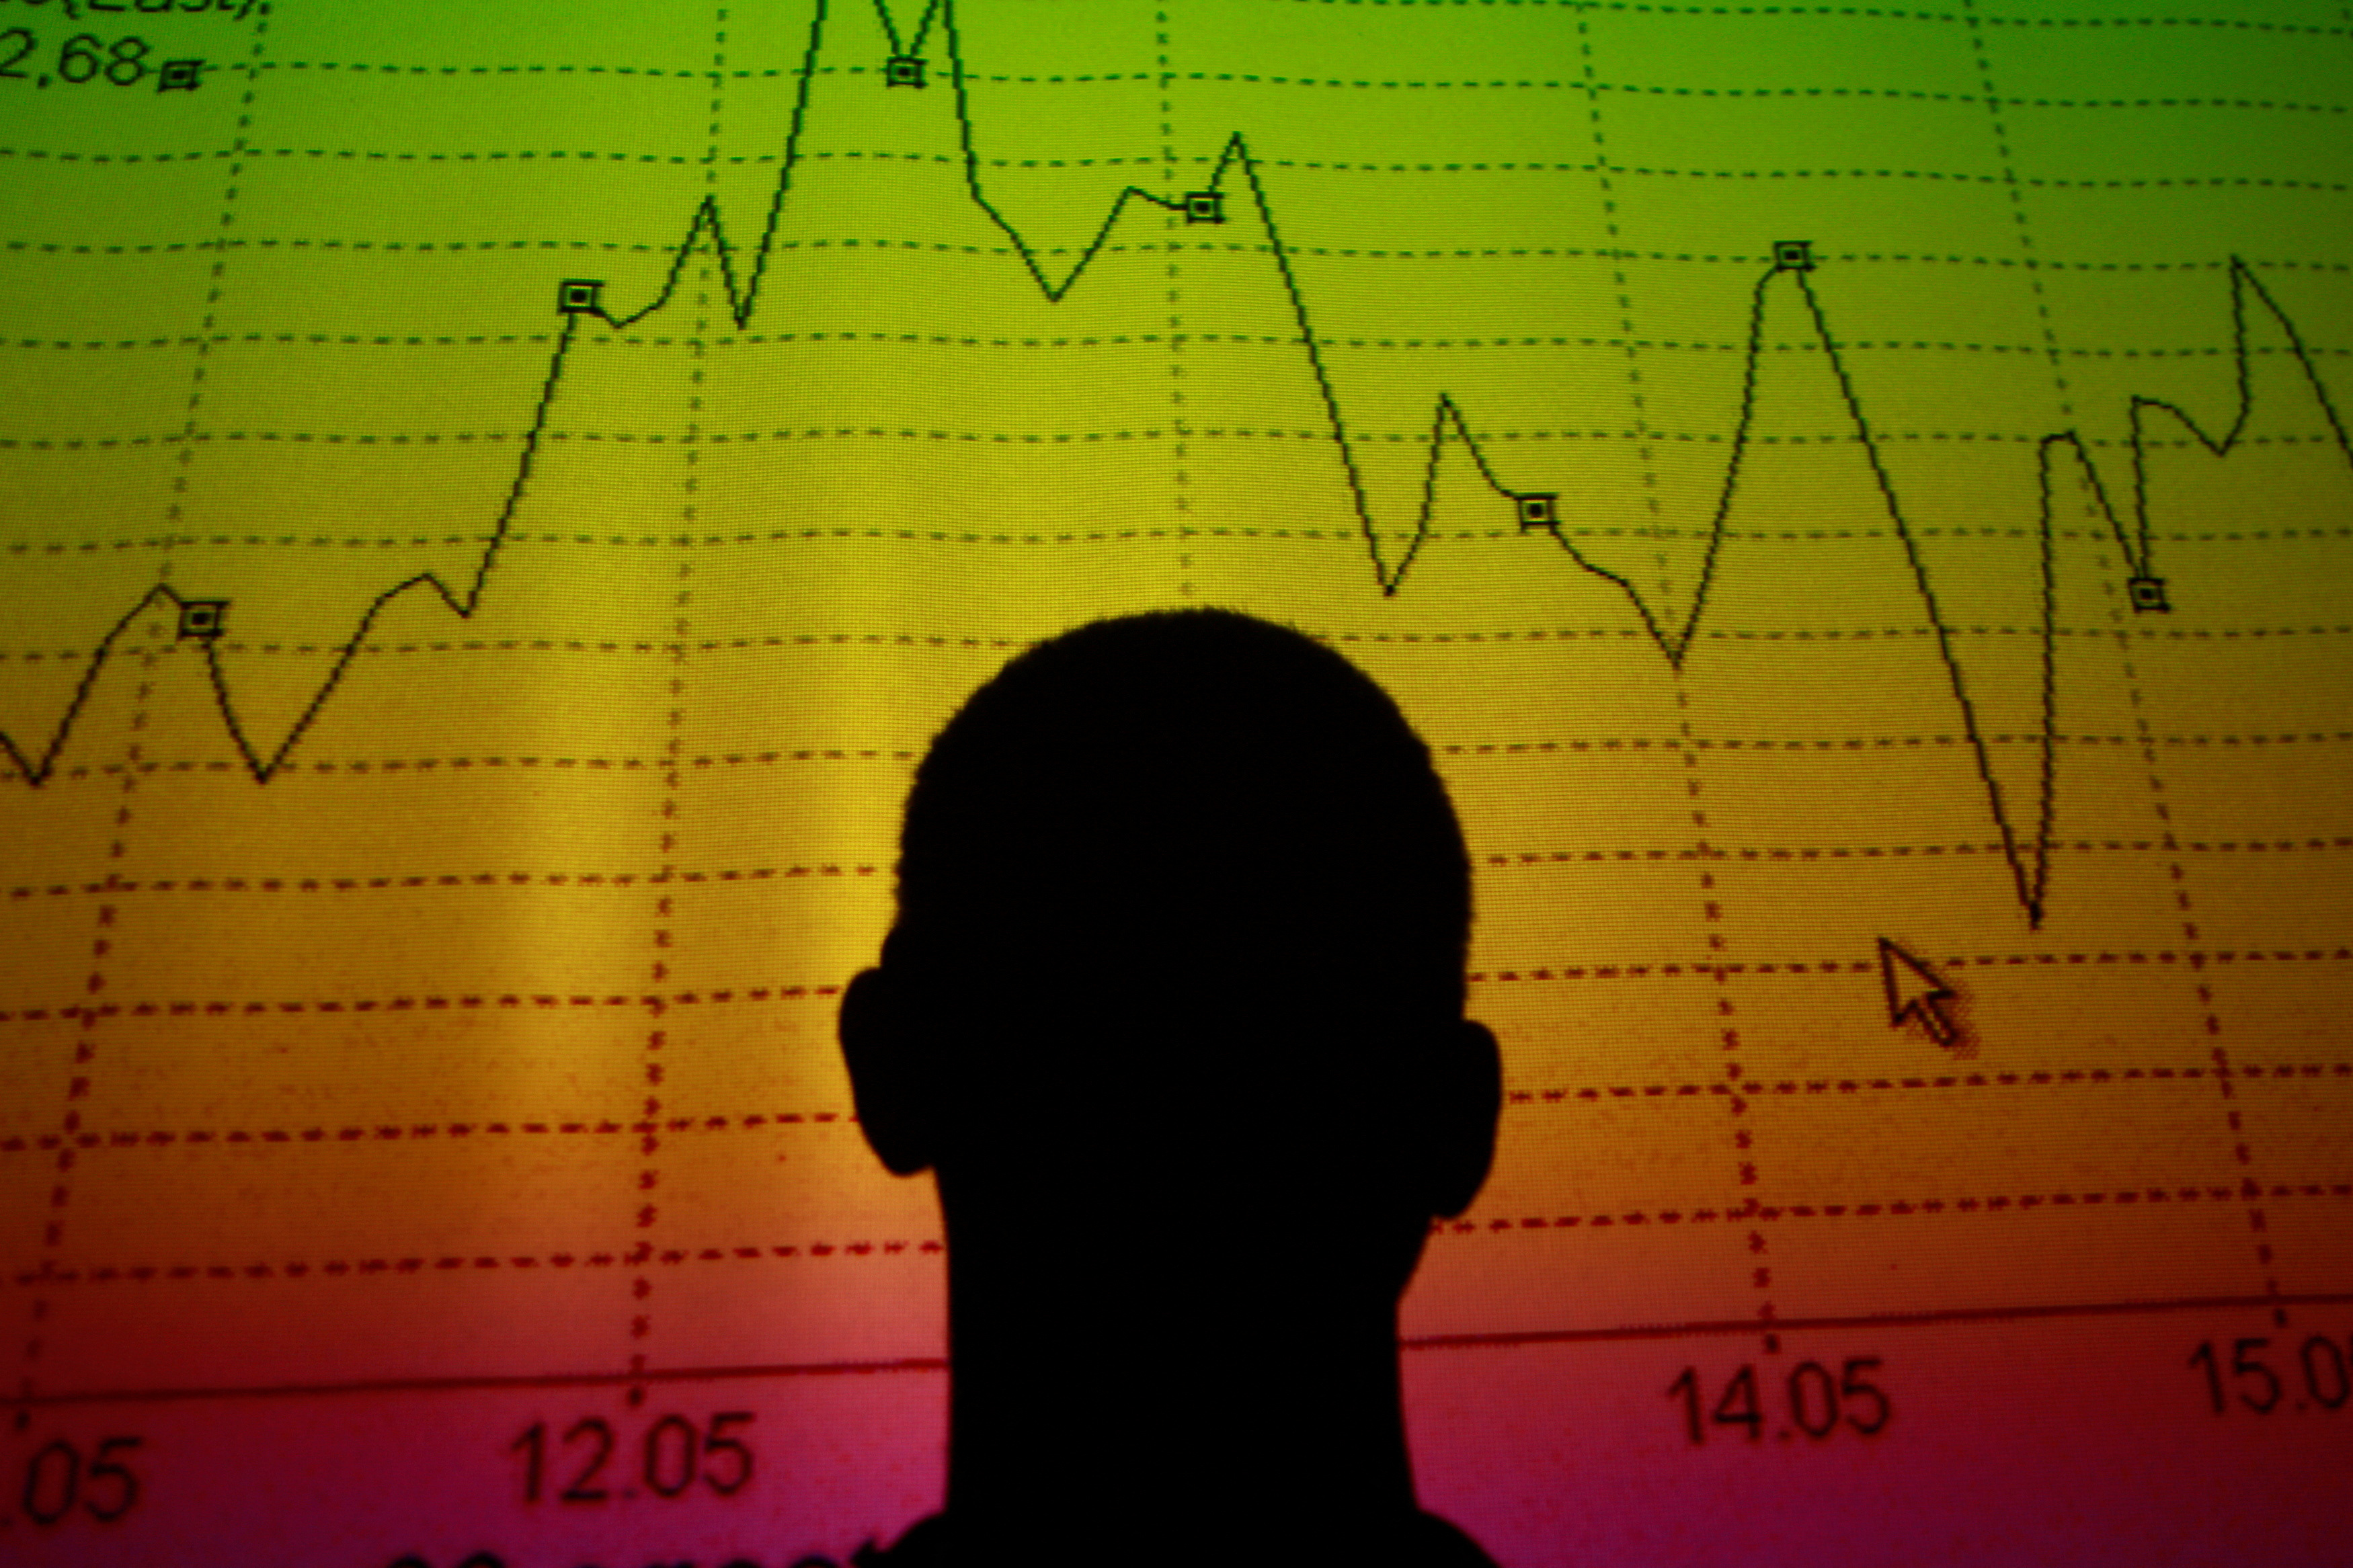 Photo illustration of man silhouetted in an electronic board showing the Italian equity market index in Rome